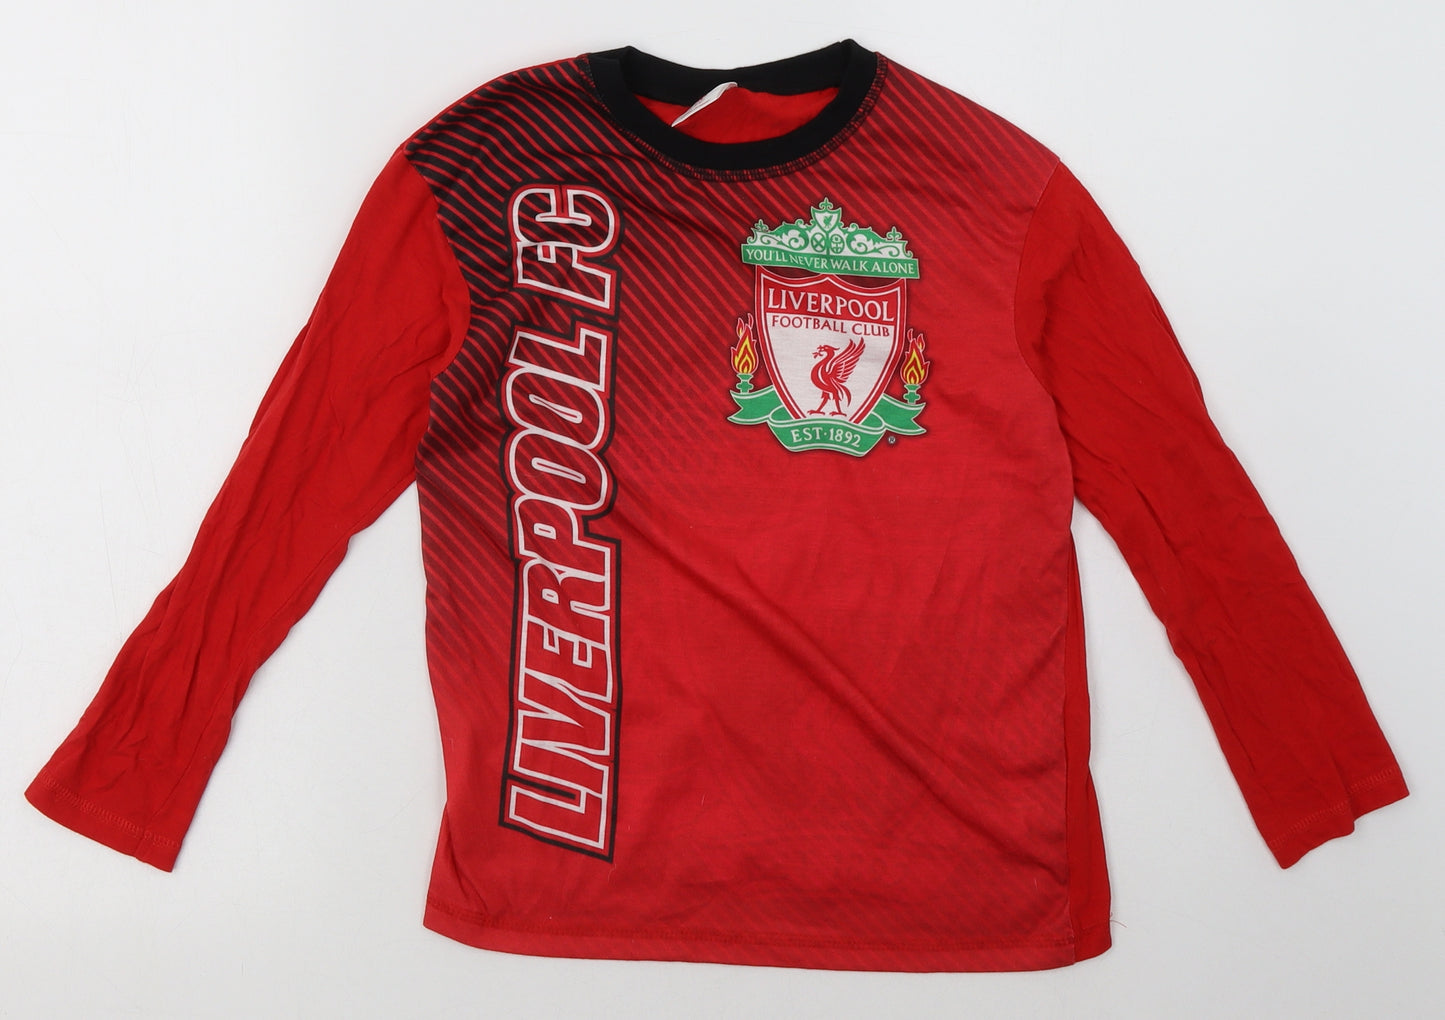 Liverpool FC Boys Red Geometric Cotton Basic Casual Size 9-10 Years Crew Neck Pullover - Liverpool Football Club